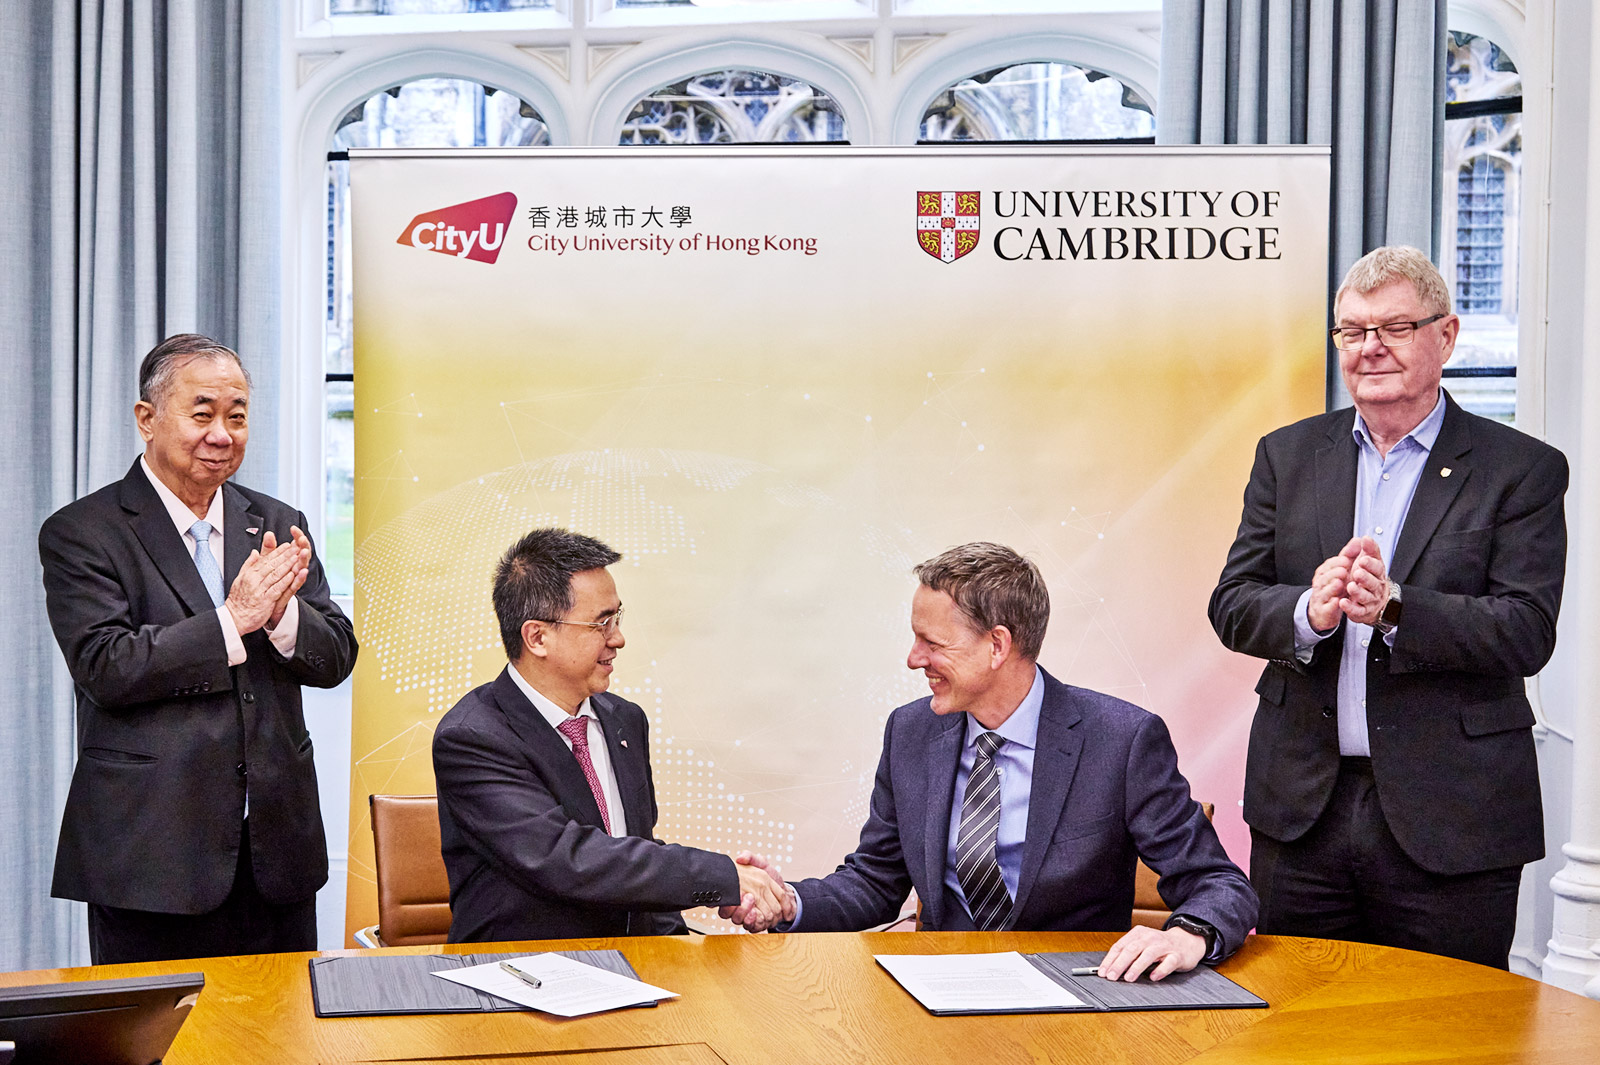 CityUHK signed MoUs with the University of Cambridge